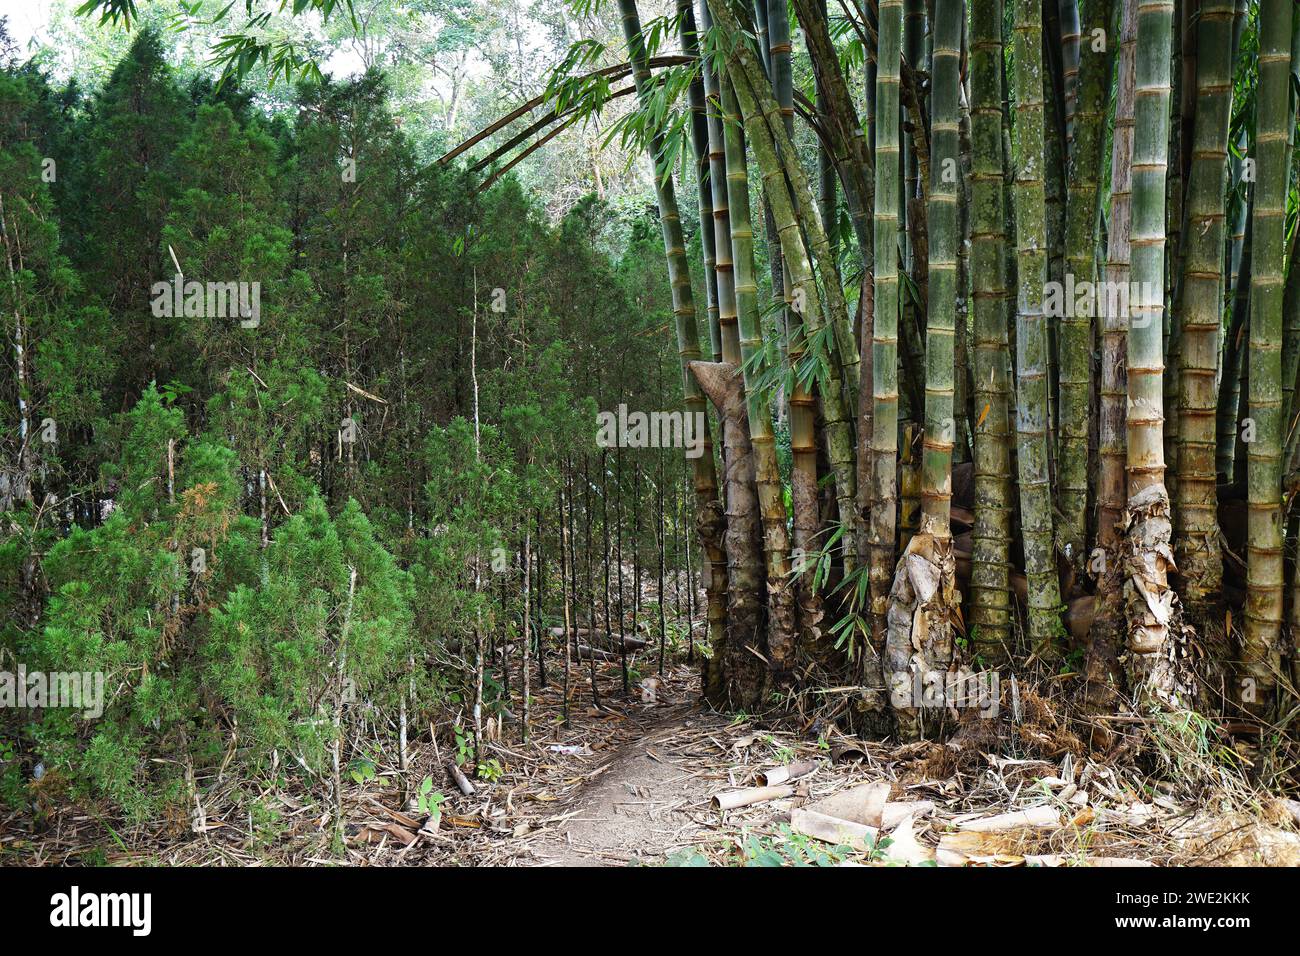 Green tropical bamboo groove forest Stock Photo